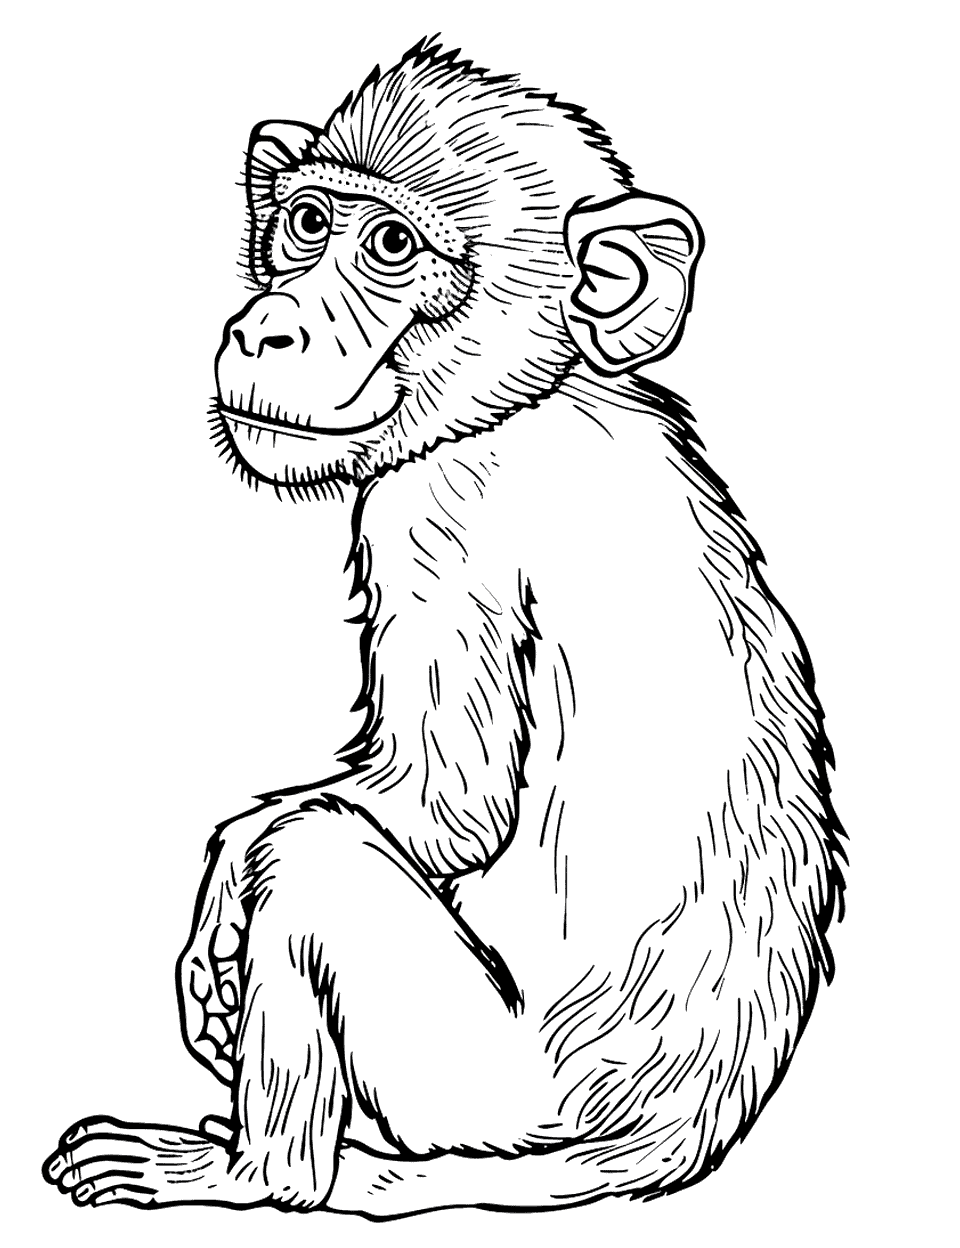 Baboon Sitting Still Monkey Coloring Page - A baboon sitting sideways towards the viewer.